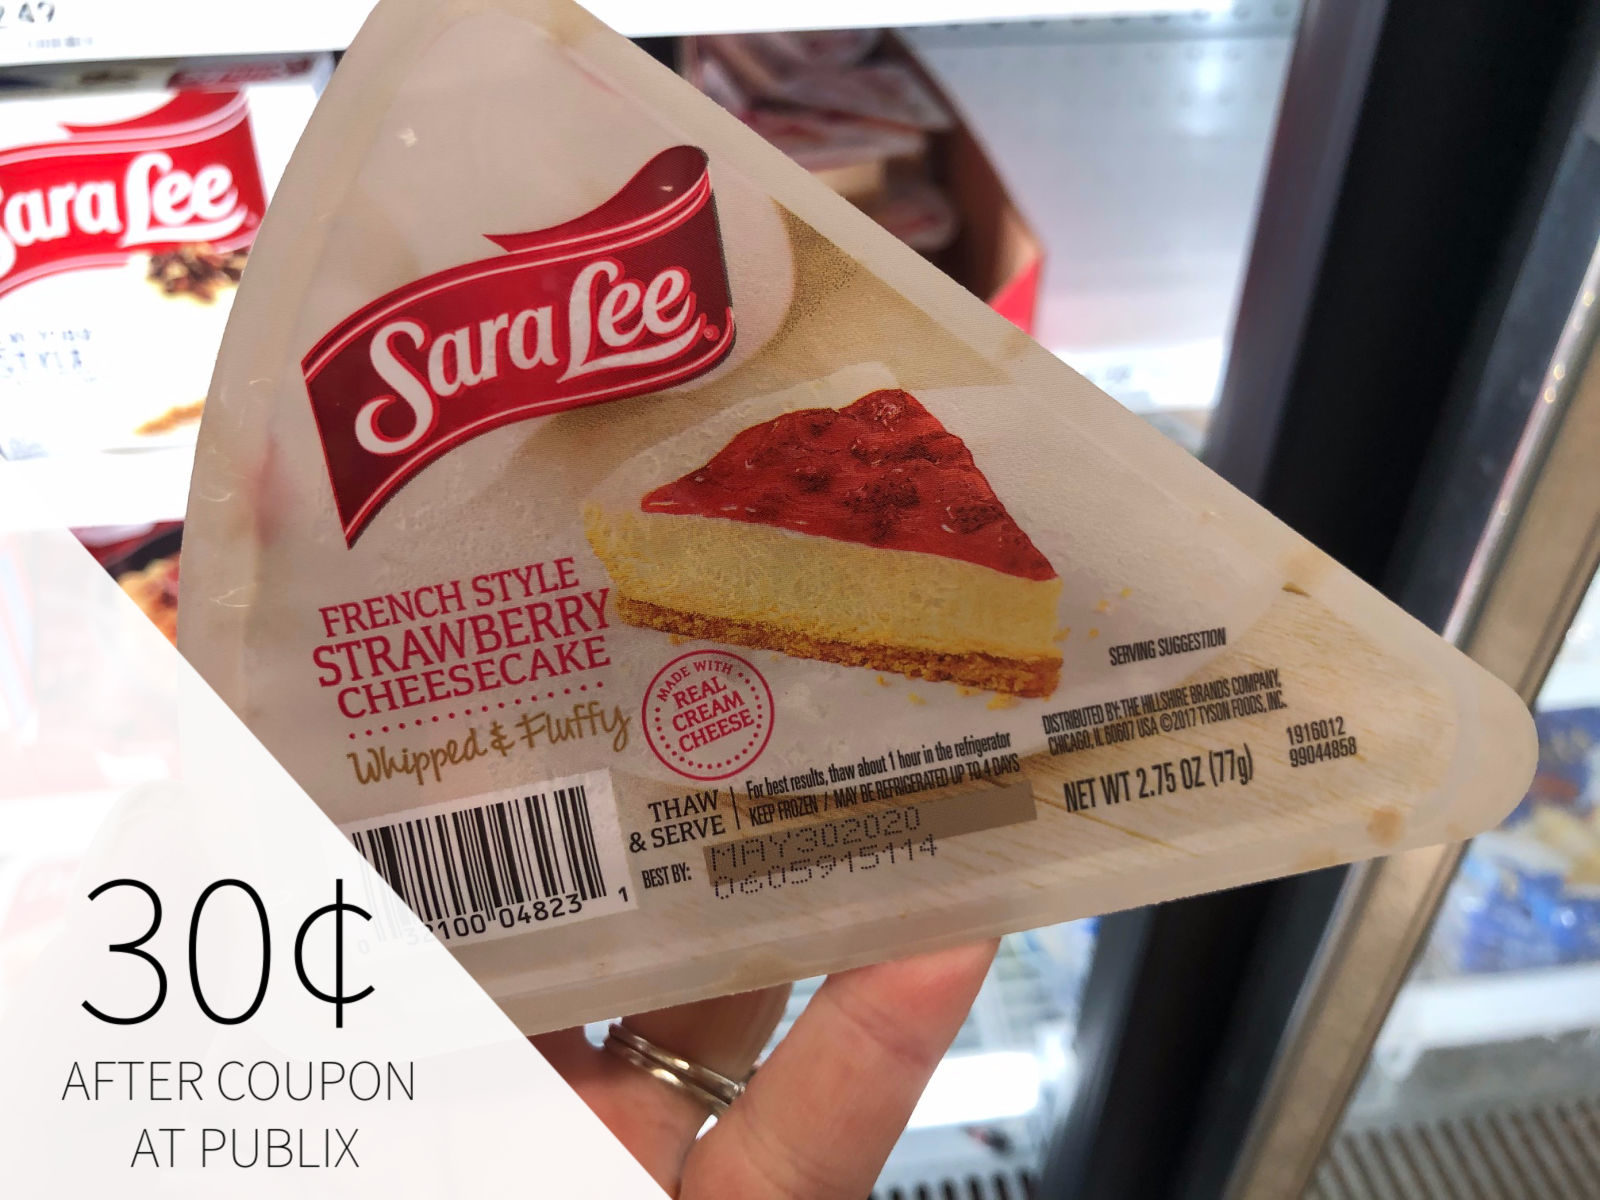 Sara Lee Pound Cheesecake Slices As Low As 20¢ At Publix on I Heart Publix